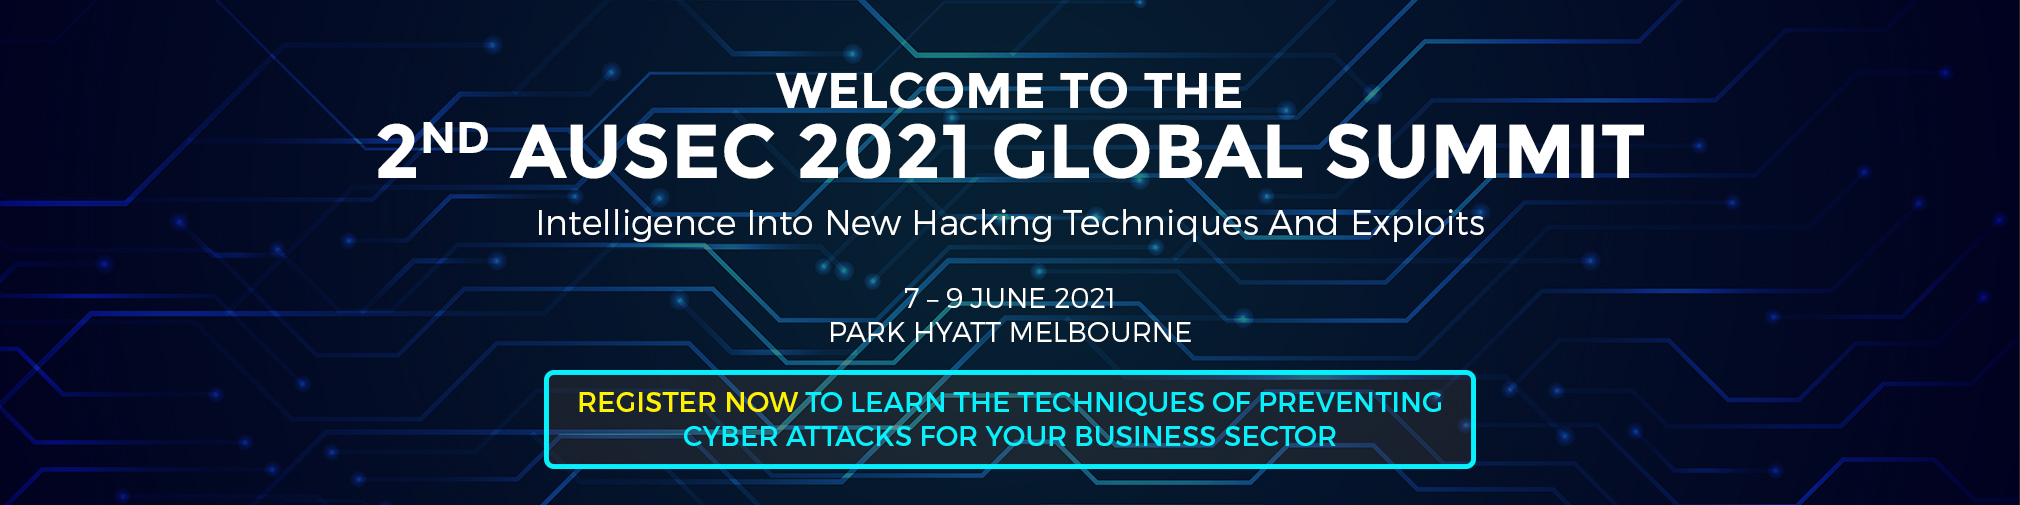 2nd Ausec 2020 Cyber Security Summit